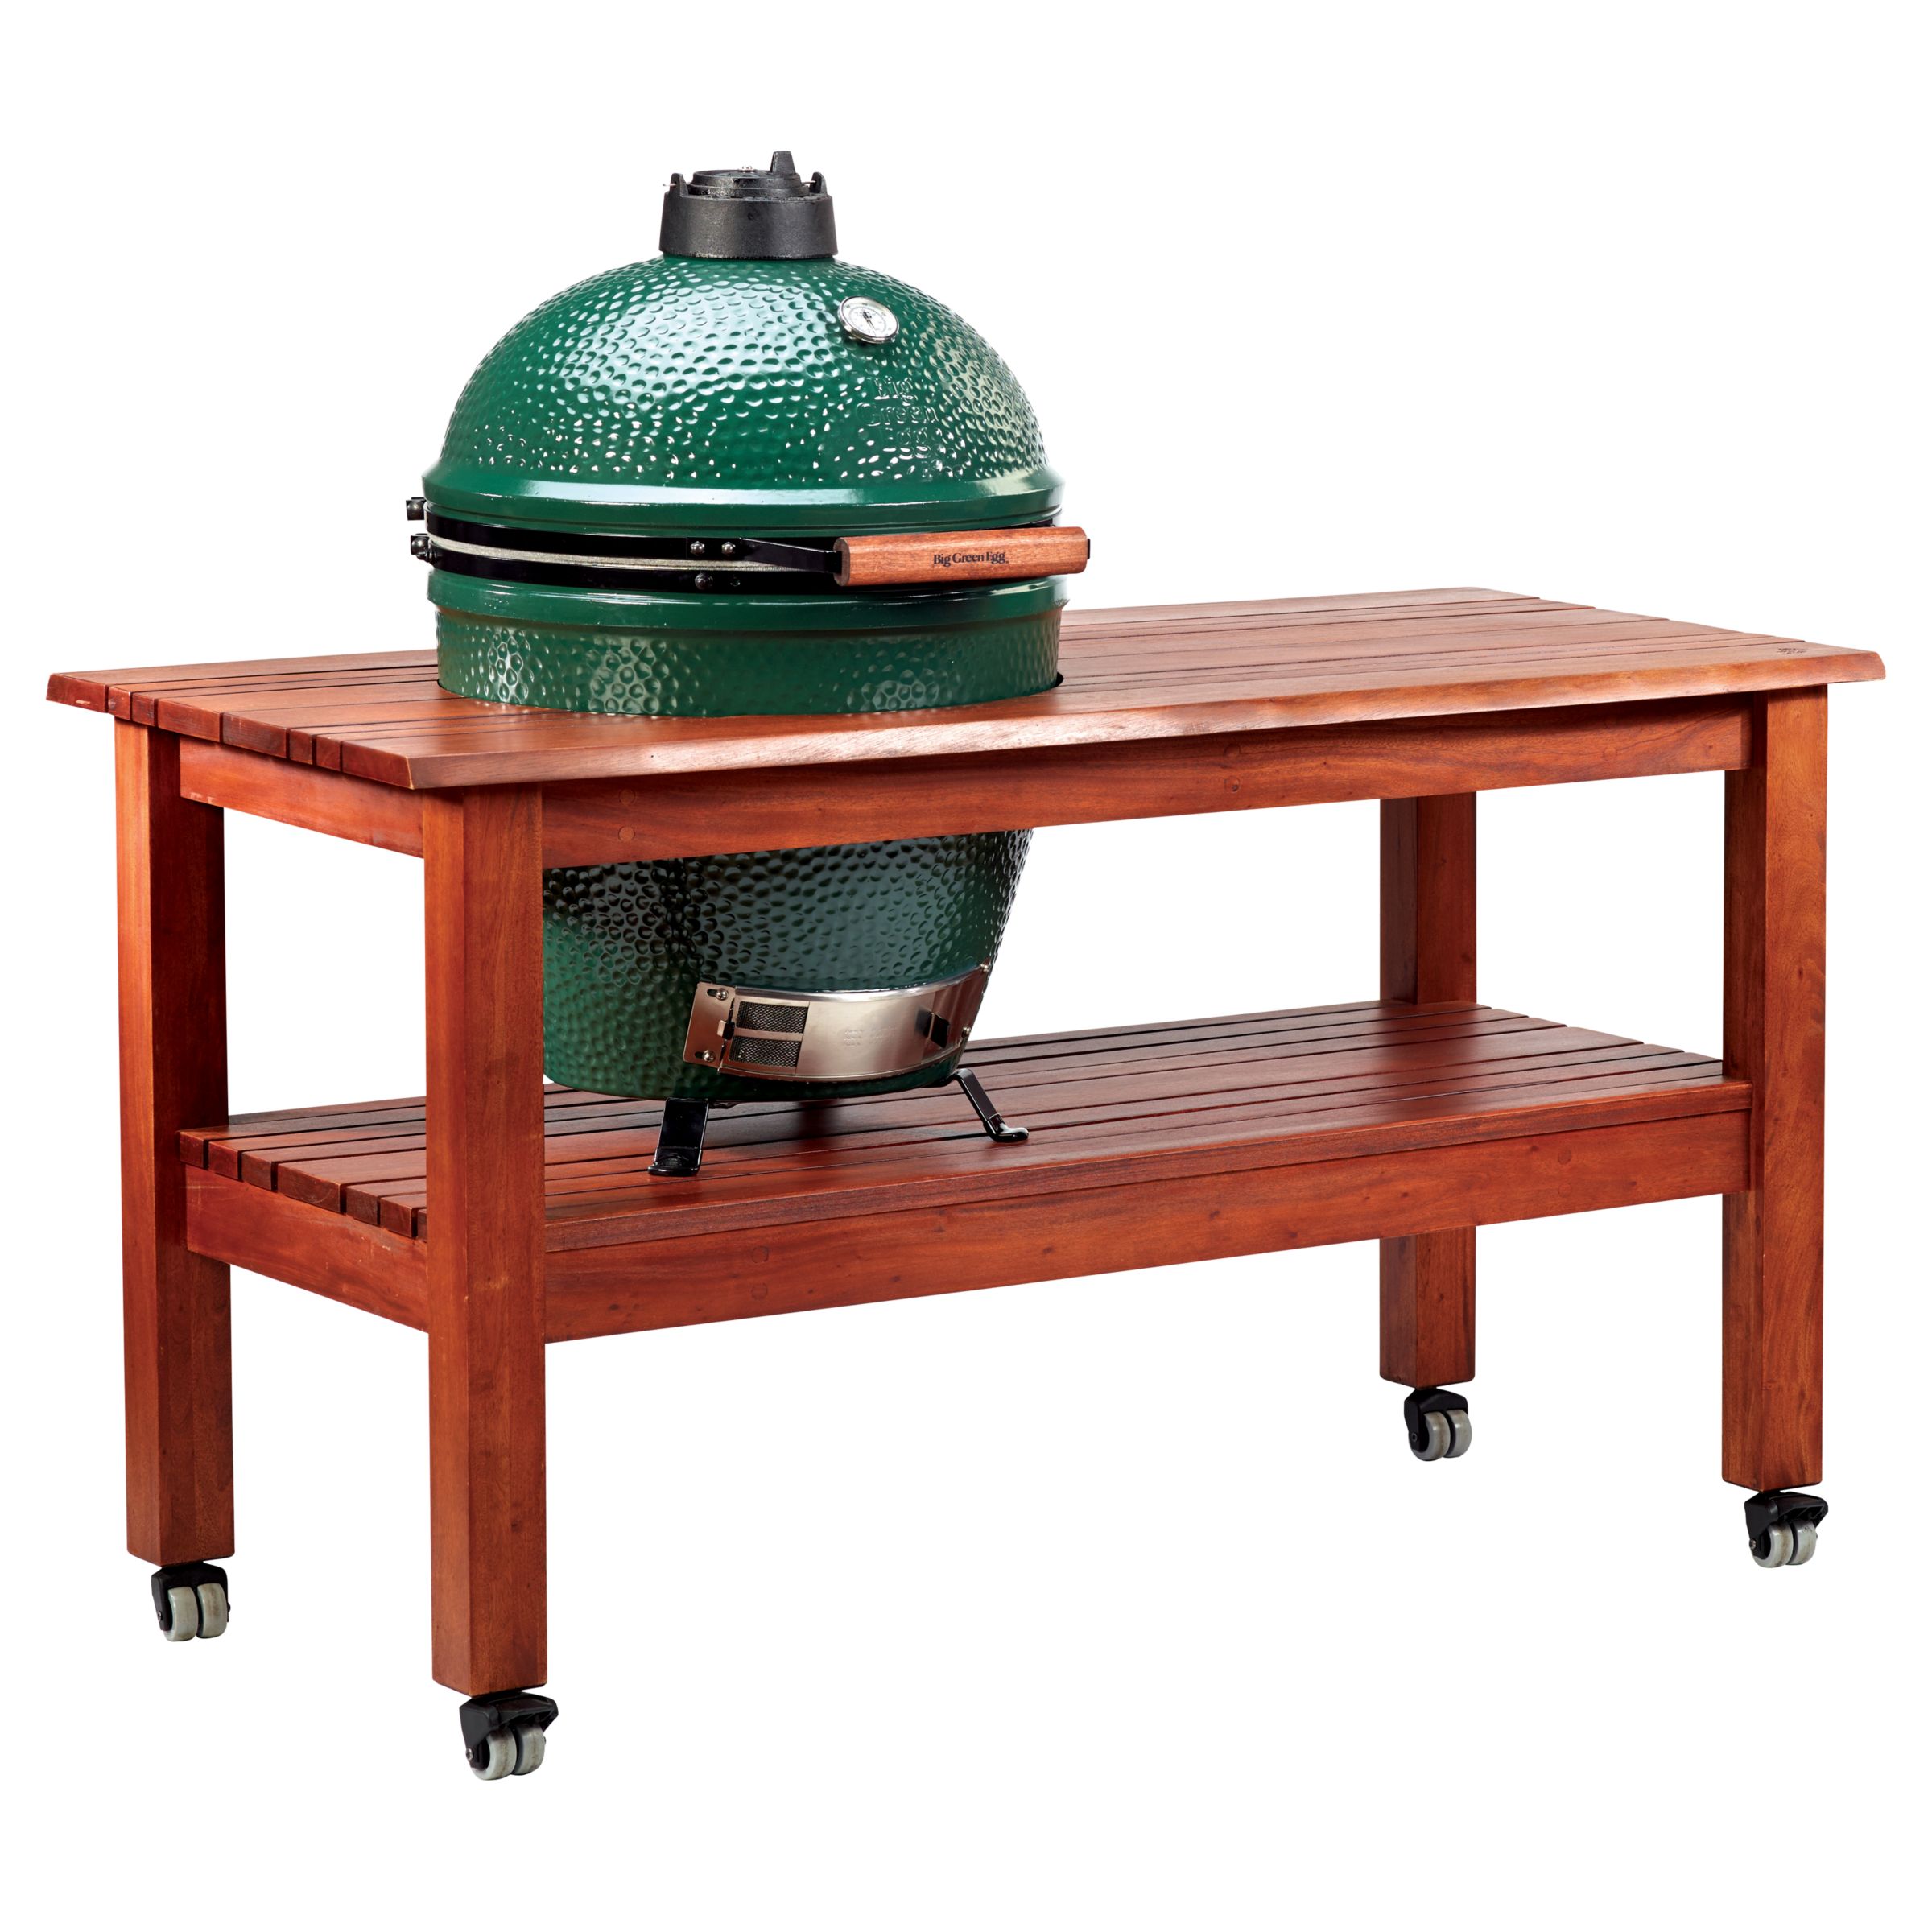 Big Green Egg Large Ceramic Charcoal Barbecue with Slatted FSC Mahogany Table